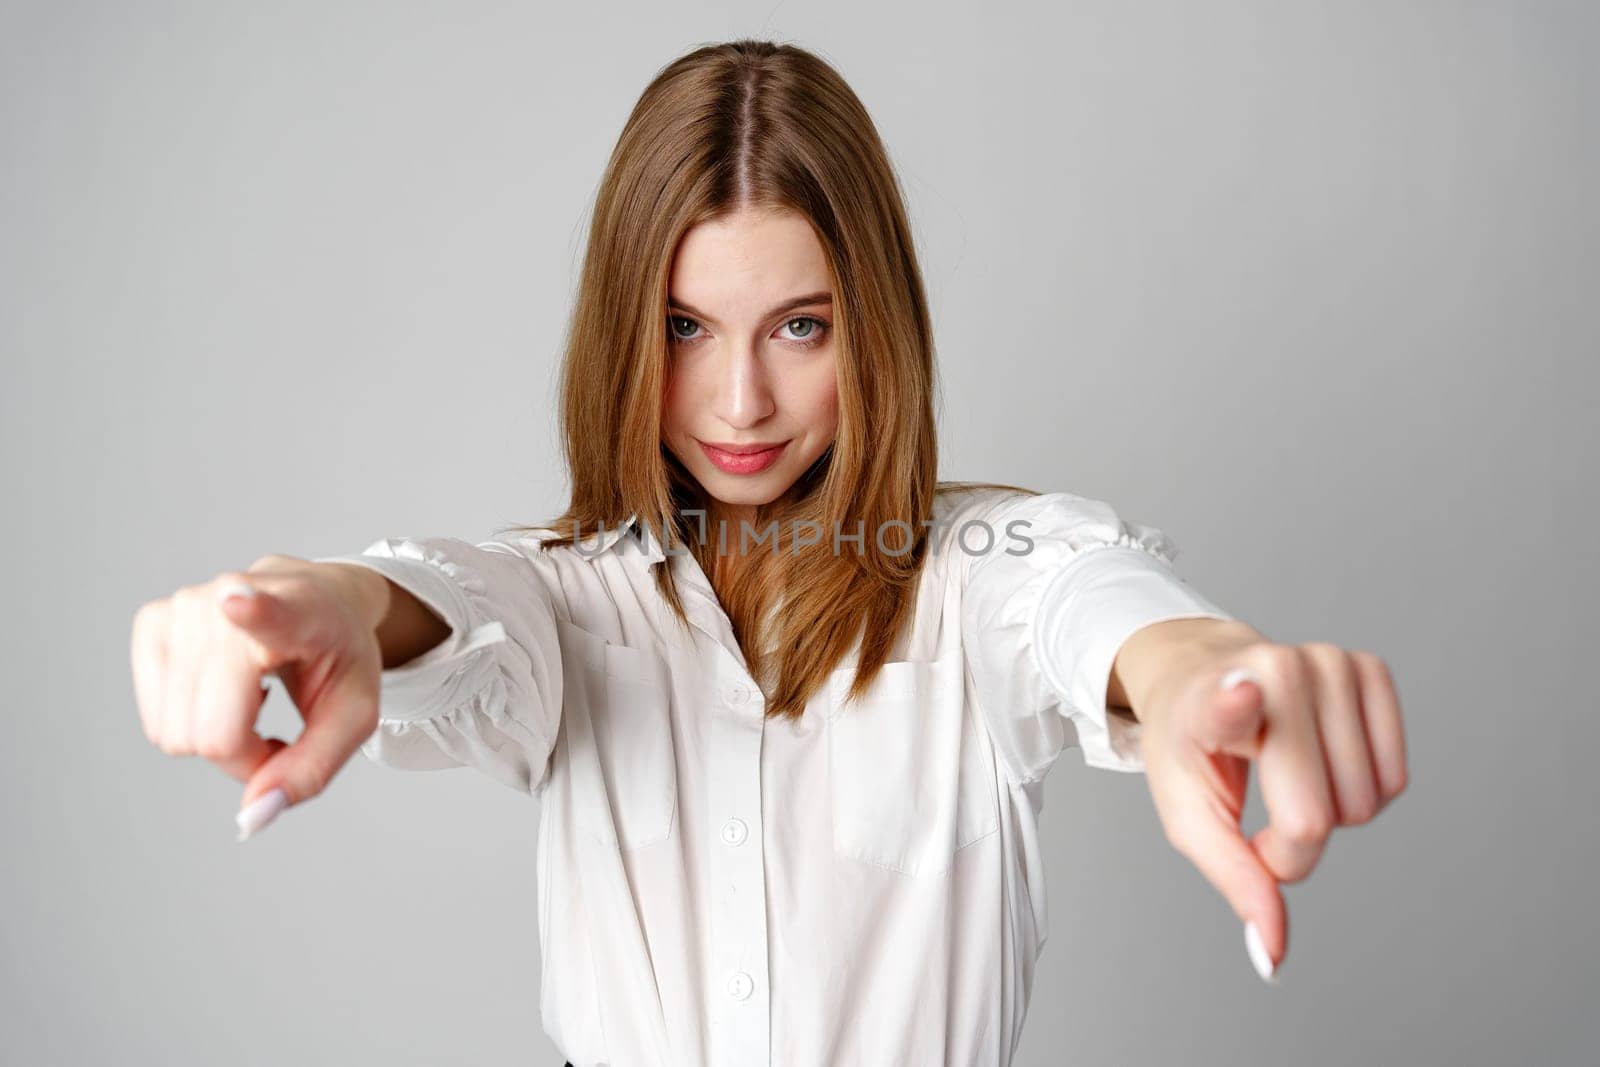 Young Woman in White Shirt Gesturing Come Here With Both Hands by Fabrikasimf